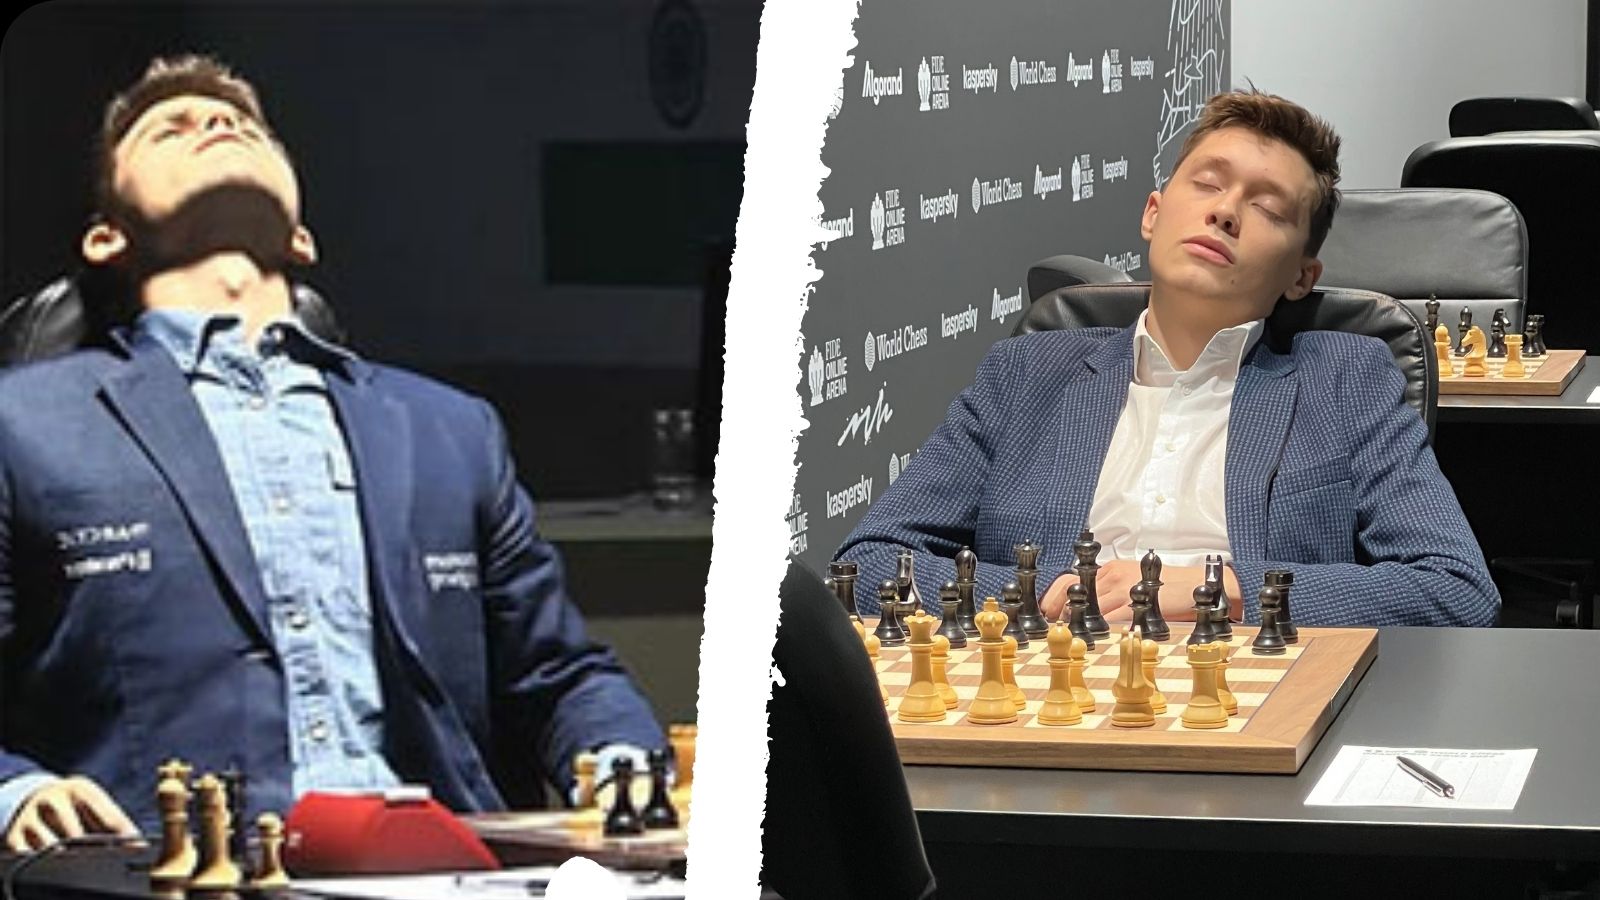 Carlsen vs Anand  The Game 2019 